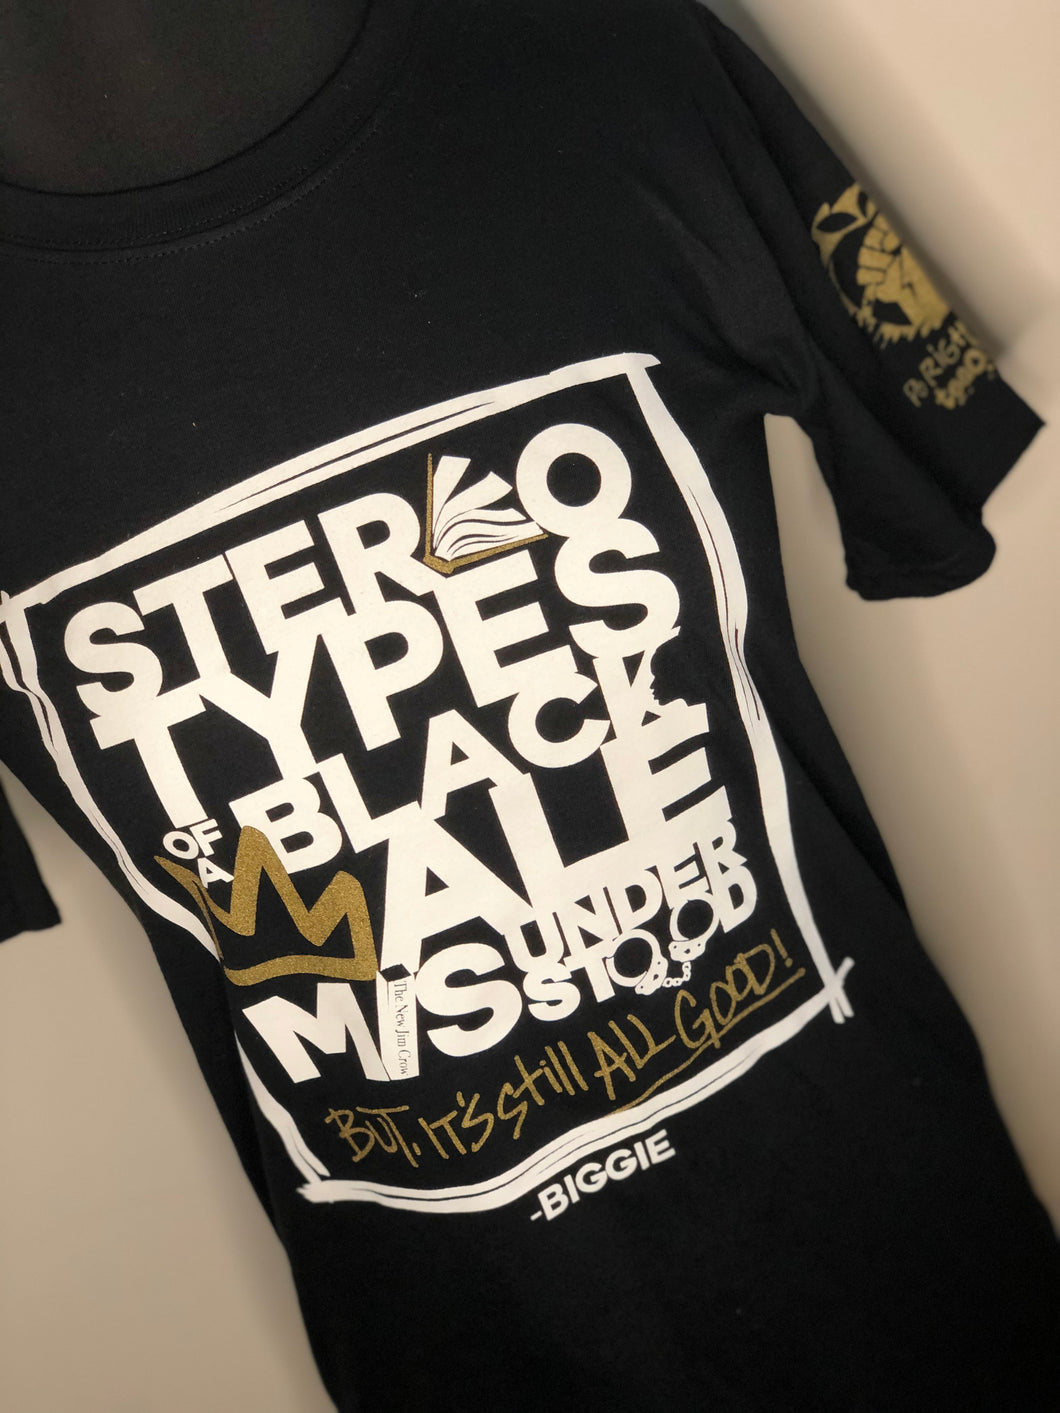 Stereotypes T-shirt